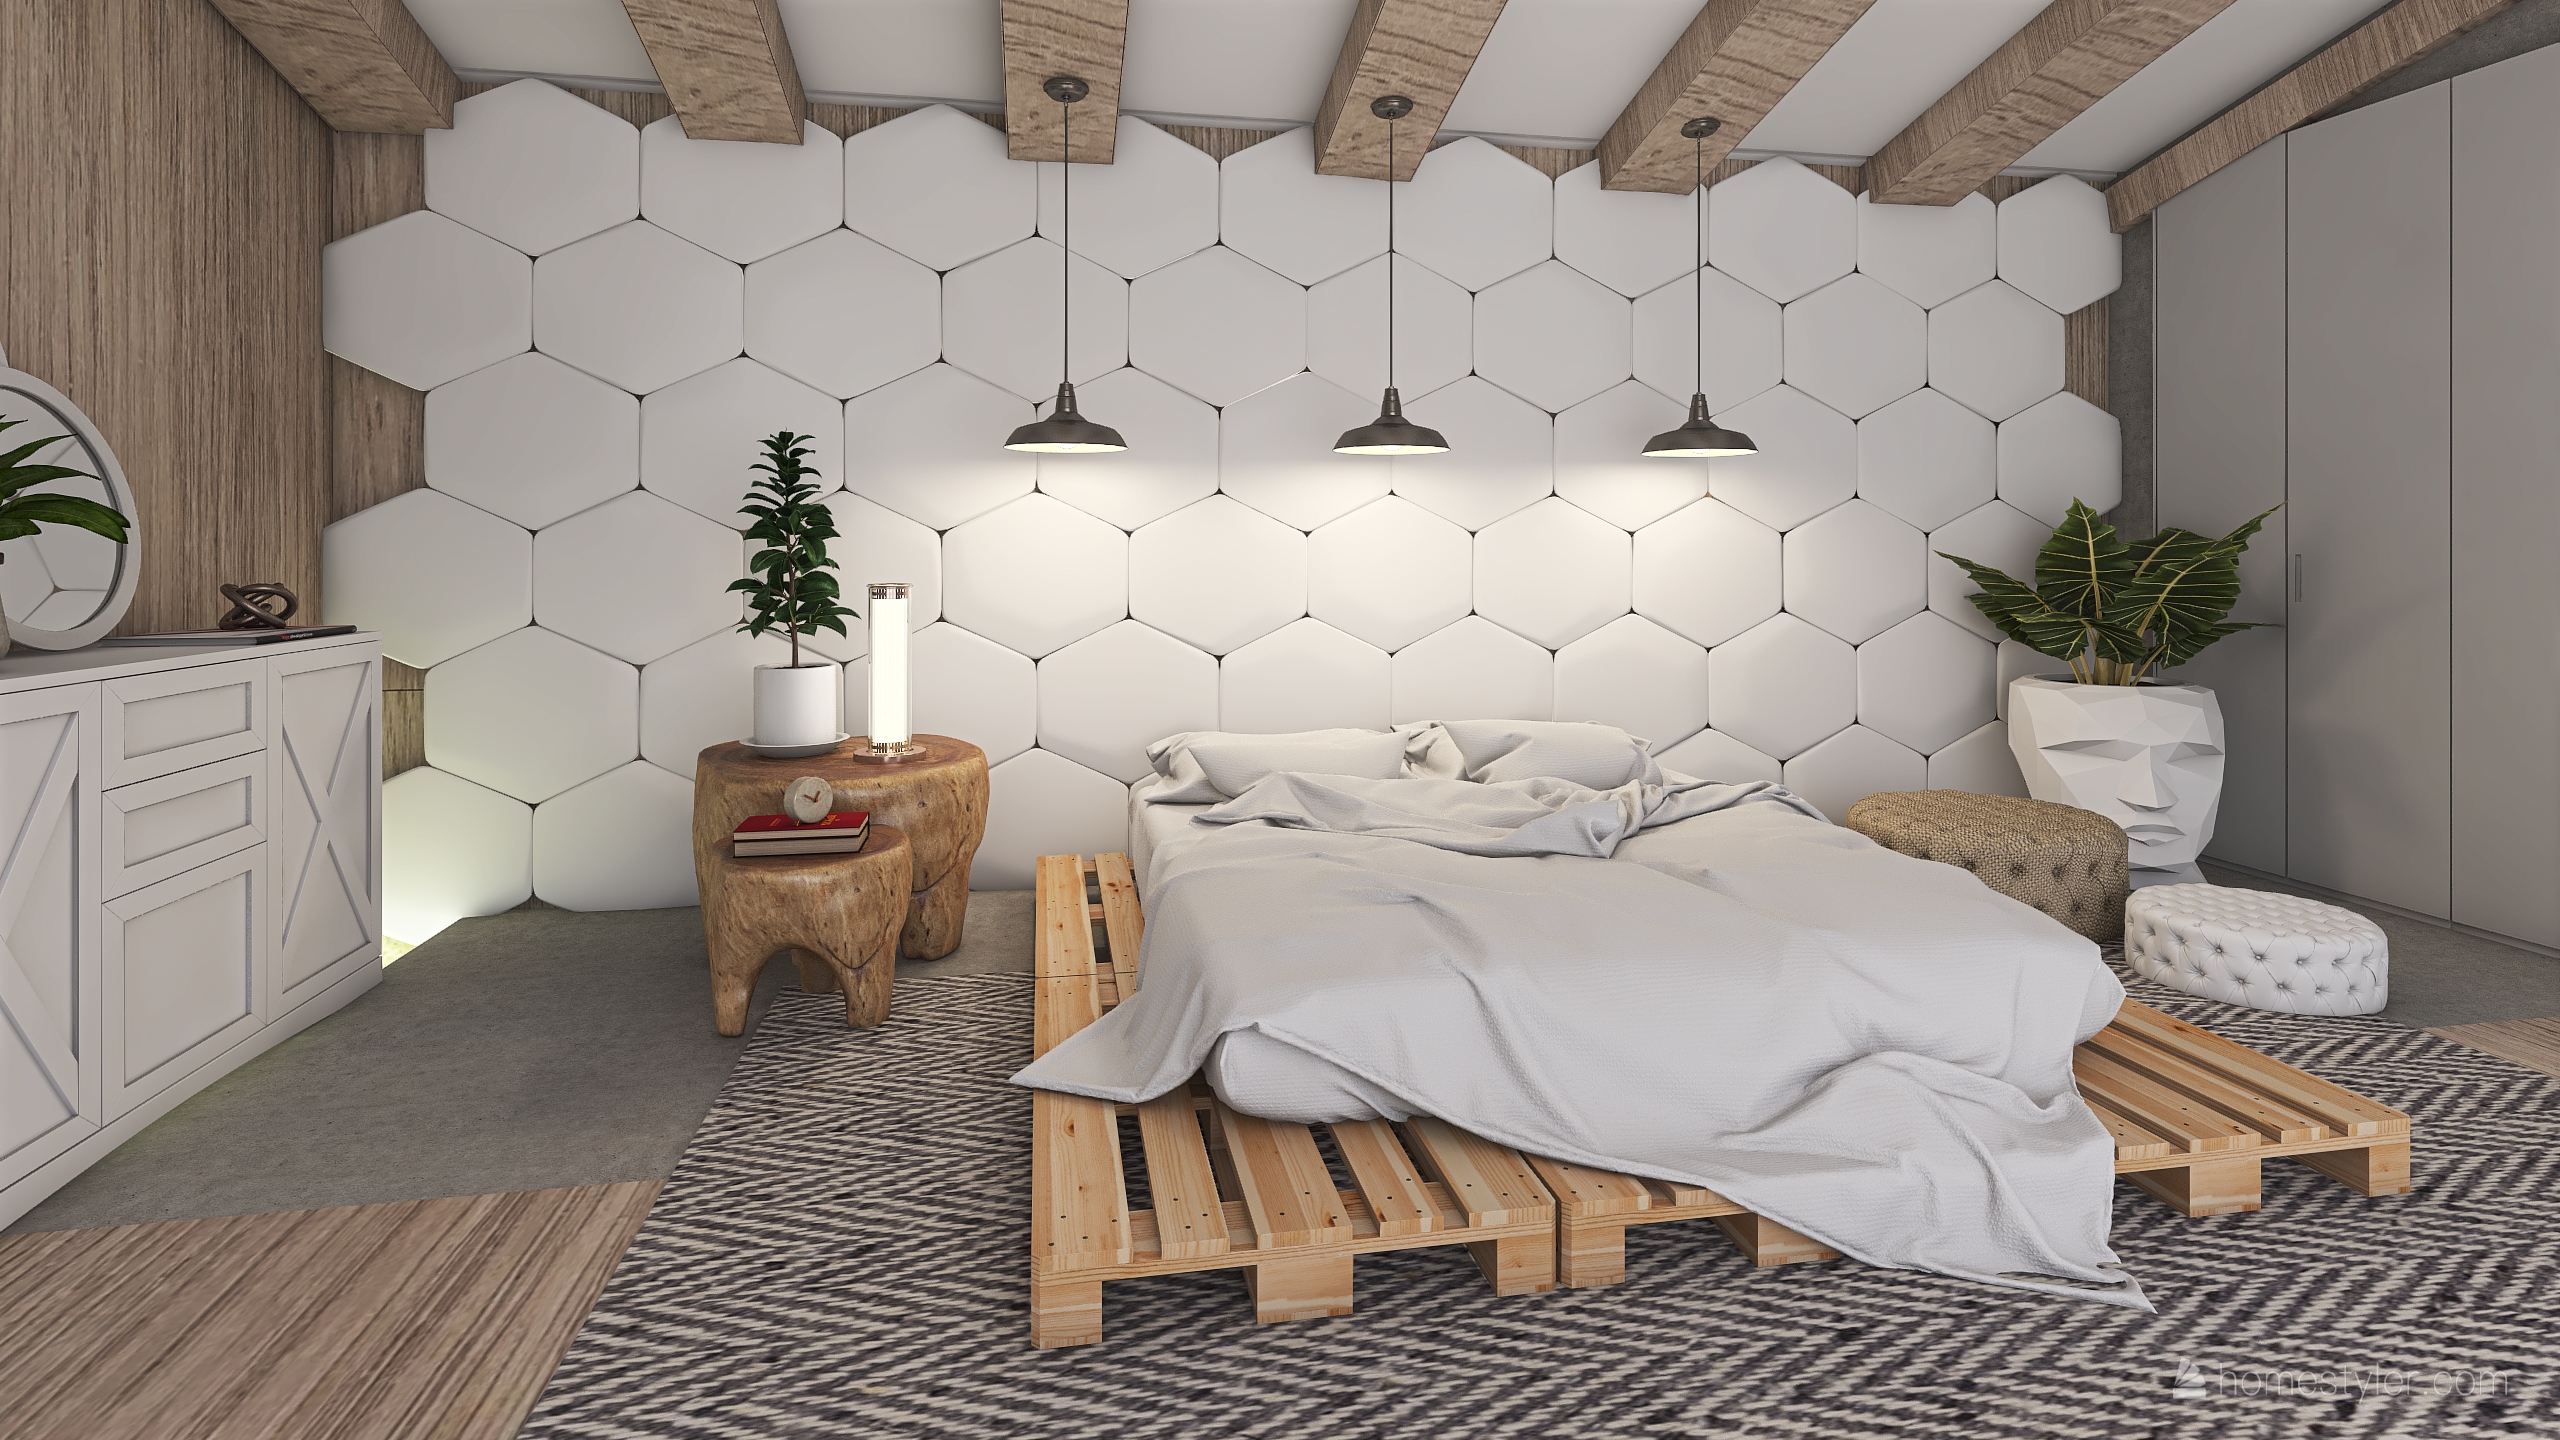 Make a bed with pallets - remix of Bonnie's Relaxation House's bedroom EGpuUV9KP4q2Zm16ymzYV1